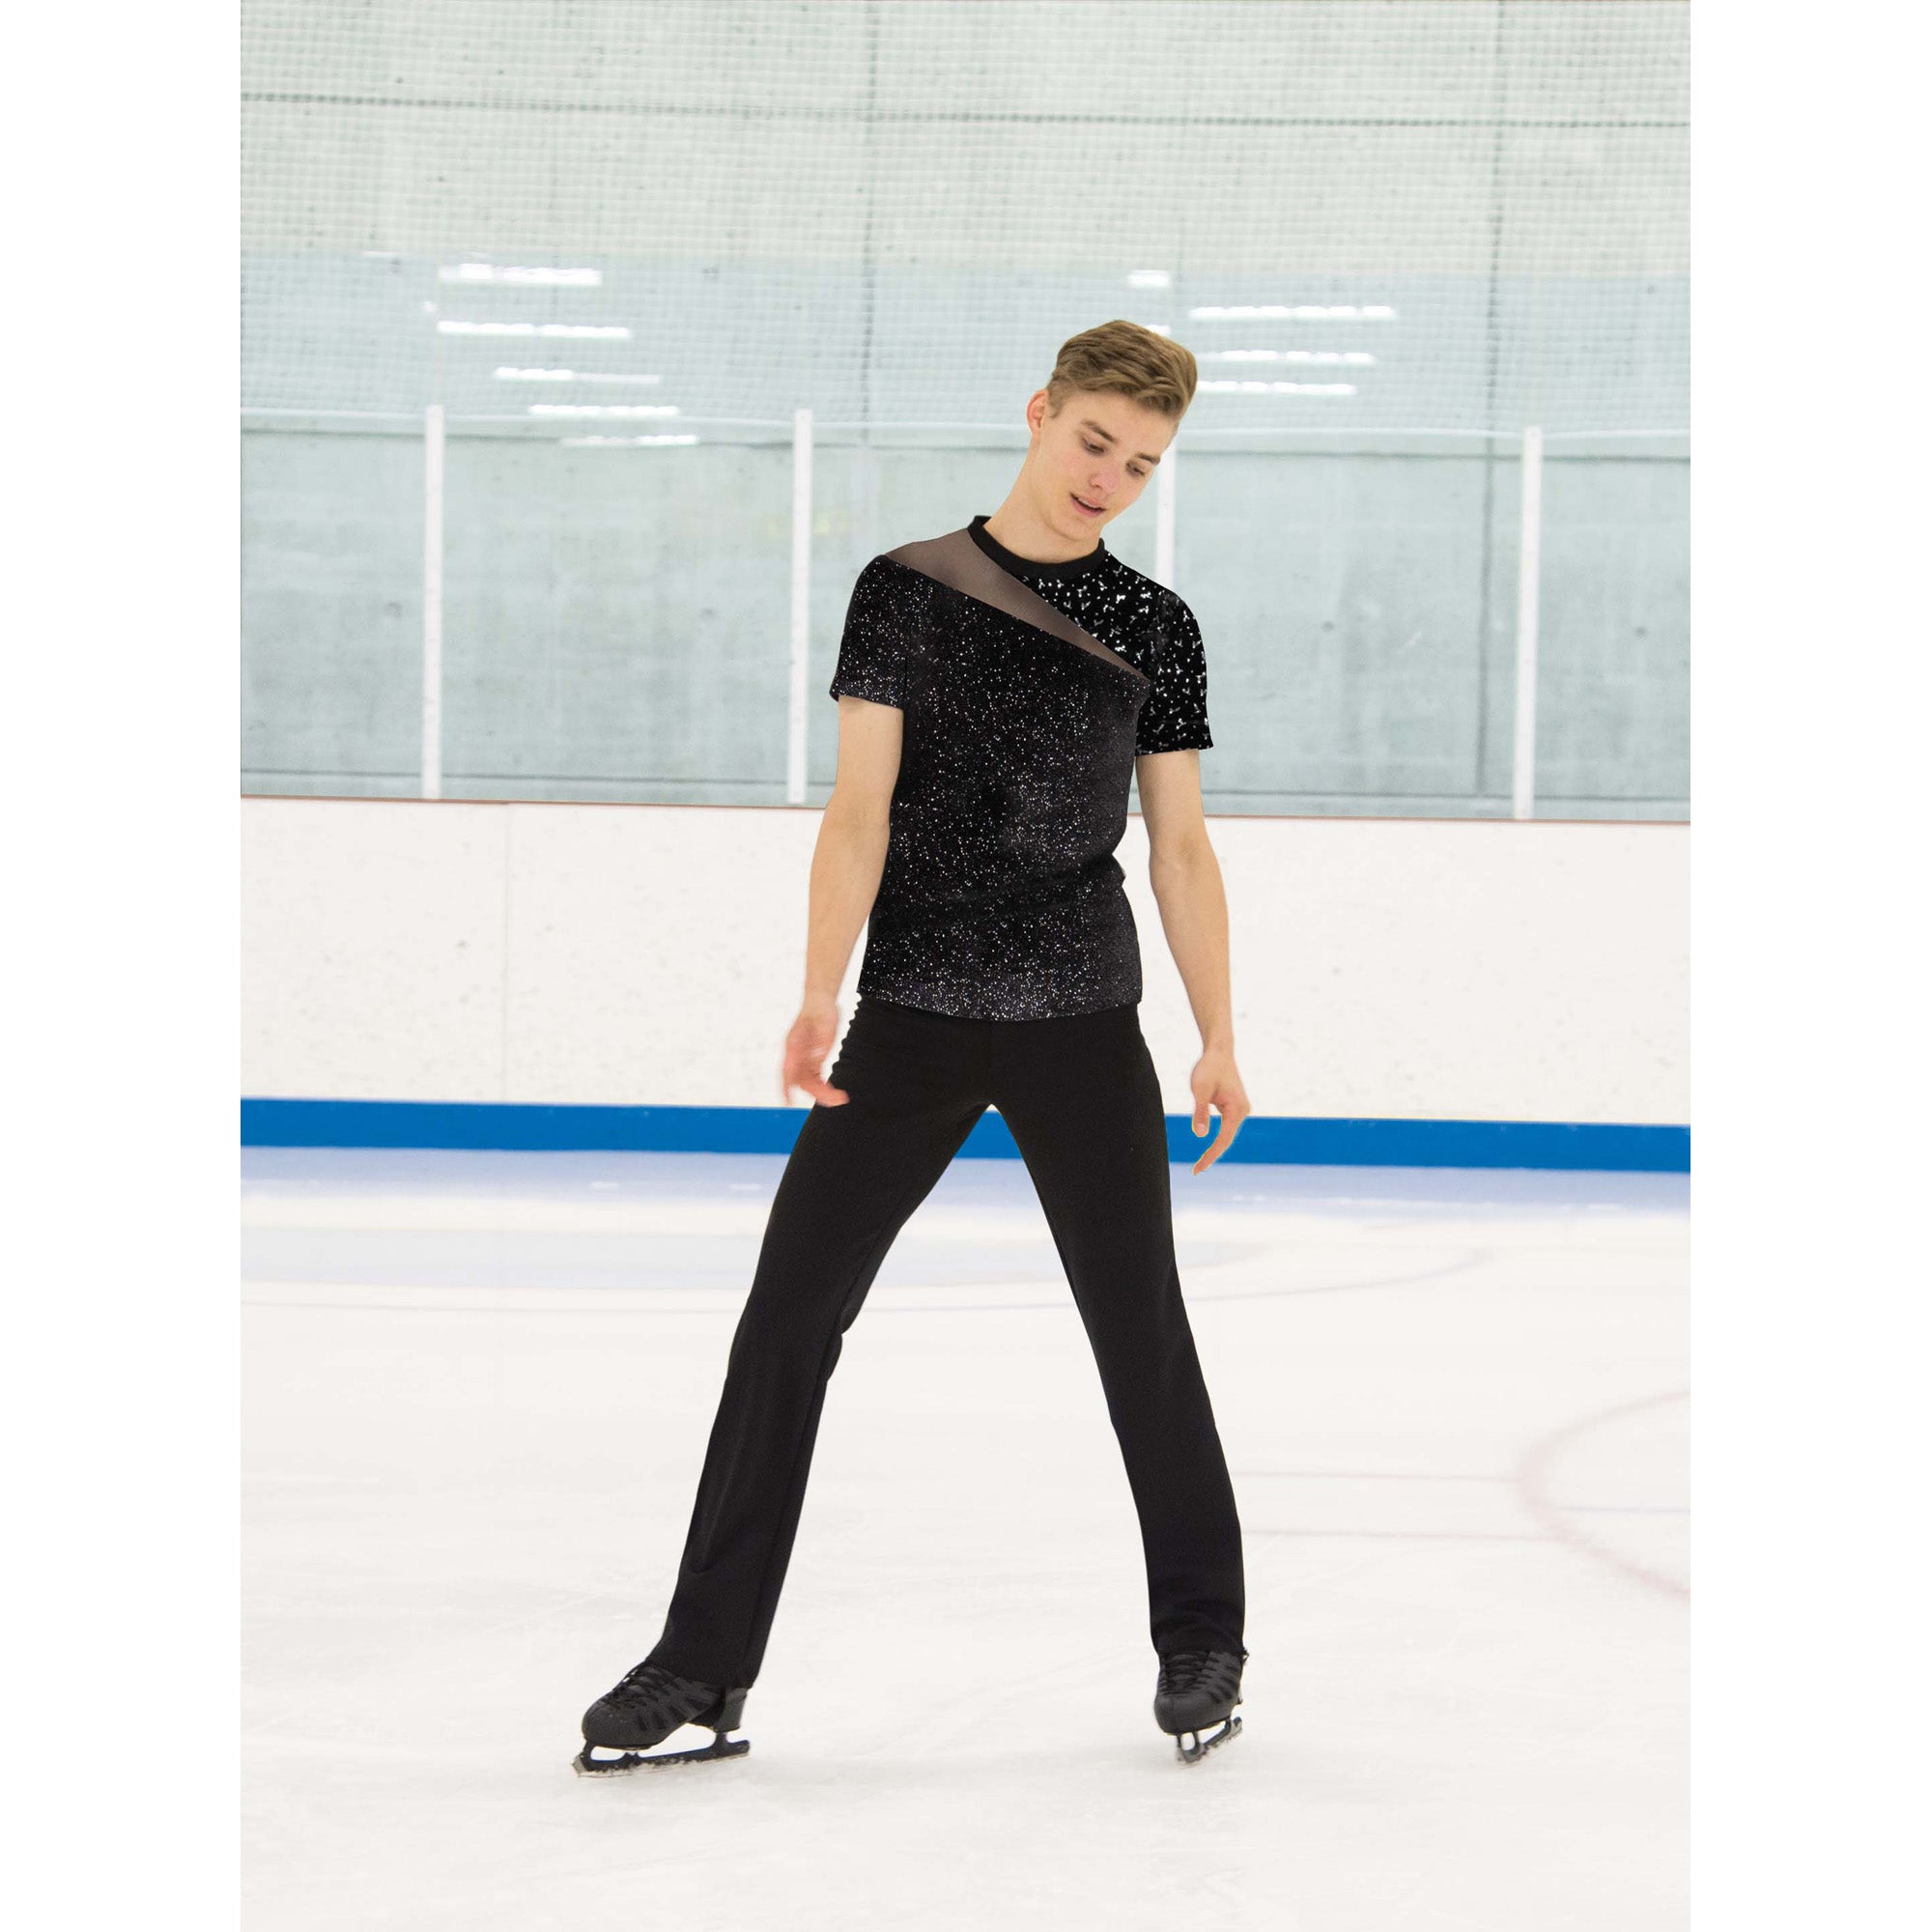 Shop Ice Skating Apparel by Brands